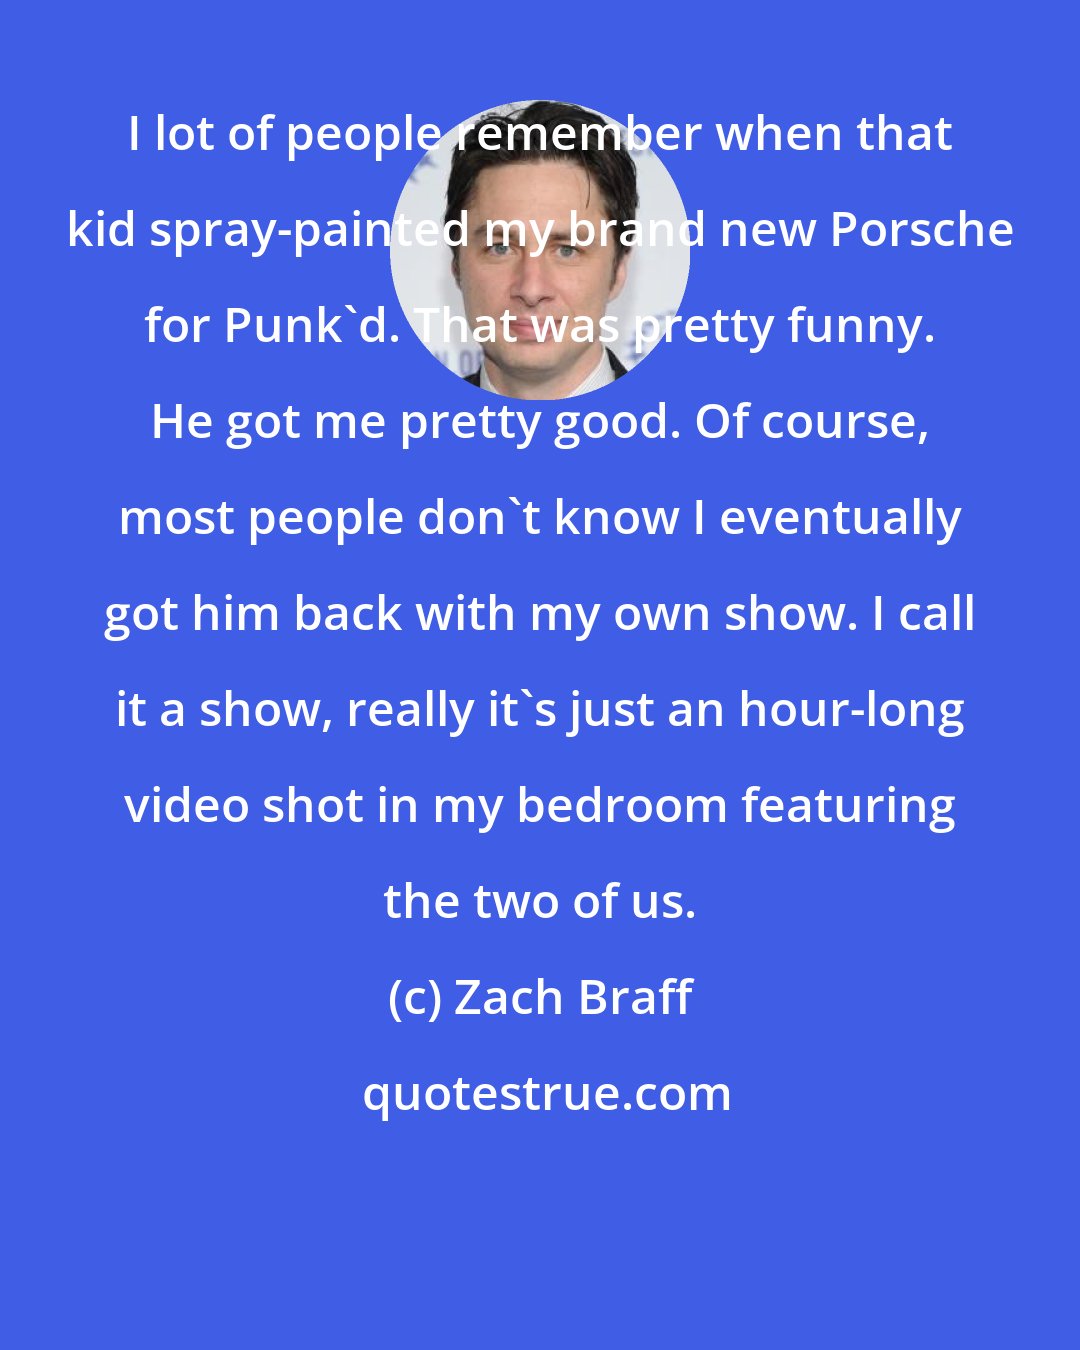 Zach Braff: I lot of people remember when that kid spray-painted my brand new Porsche for Punk'd. That was pretty funny. He got me pretty good. Of course, most people don't know I eventually got him back with my own show. I call it a show, really it's just an hour-long video shot in my bedroom featuring the two of us.